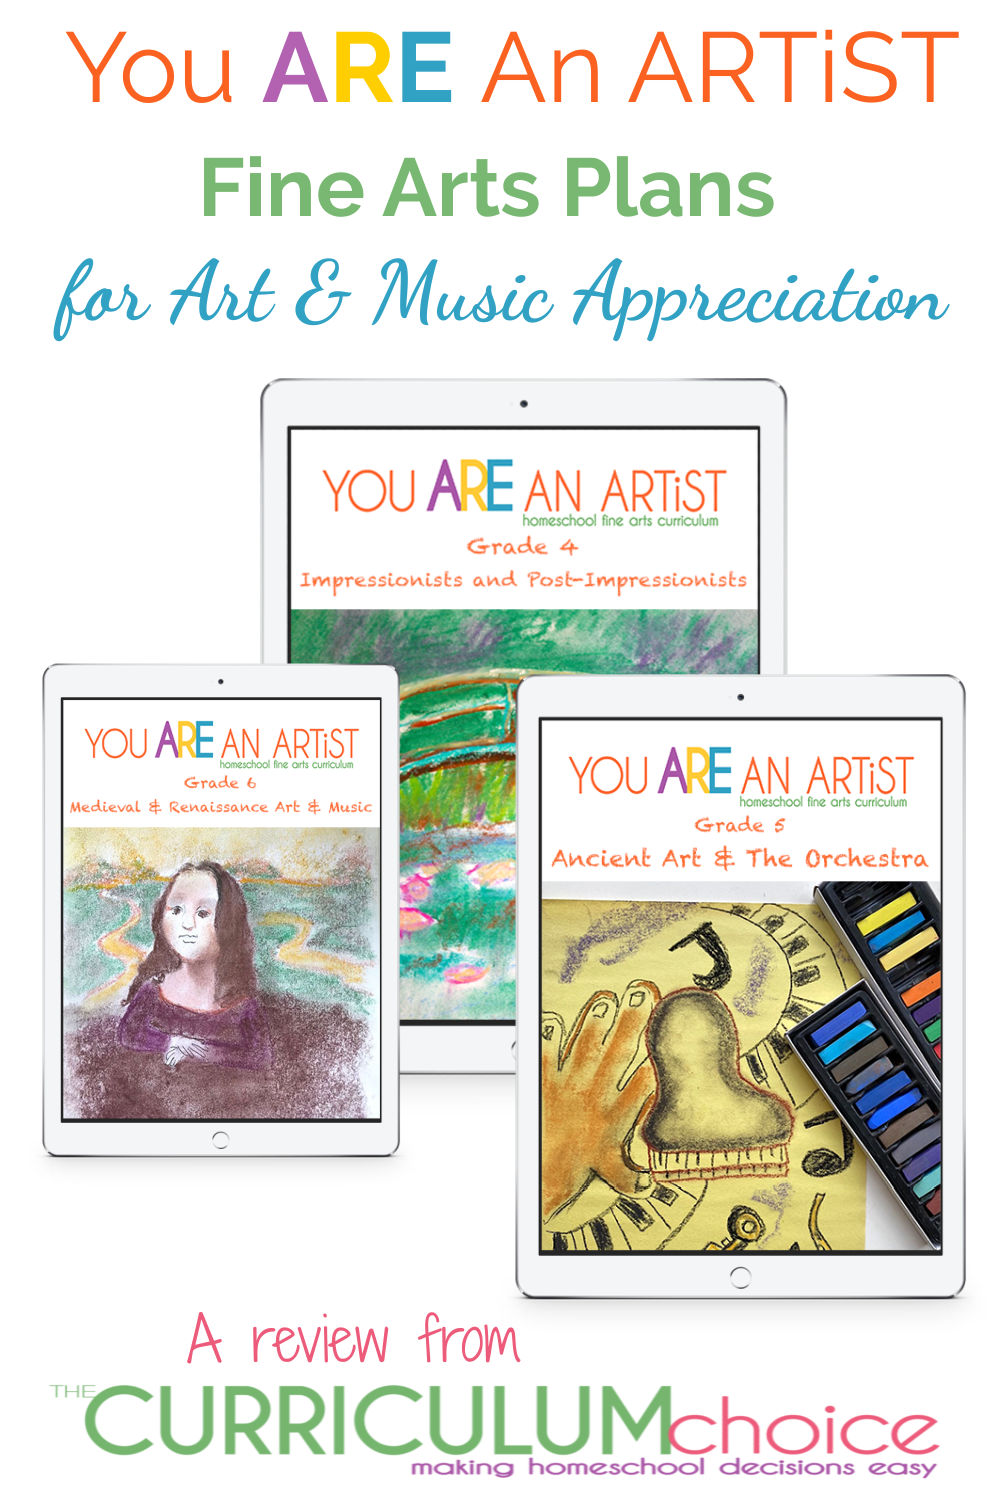 You ARE An ARTiST Fine Arts Plans for Art & Music Appreciation are grade level (1-12), simple to use, Charlotte Mason style plans for teaching art and music in your homeschool.  A review from The Curriculum Choice